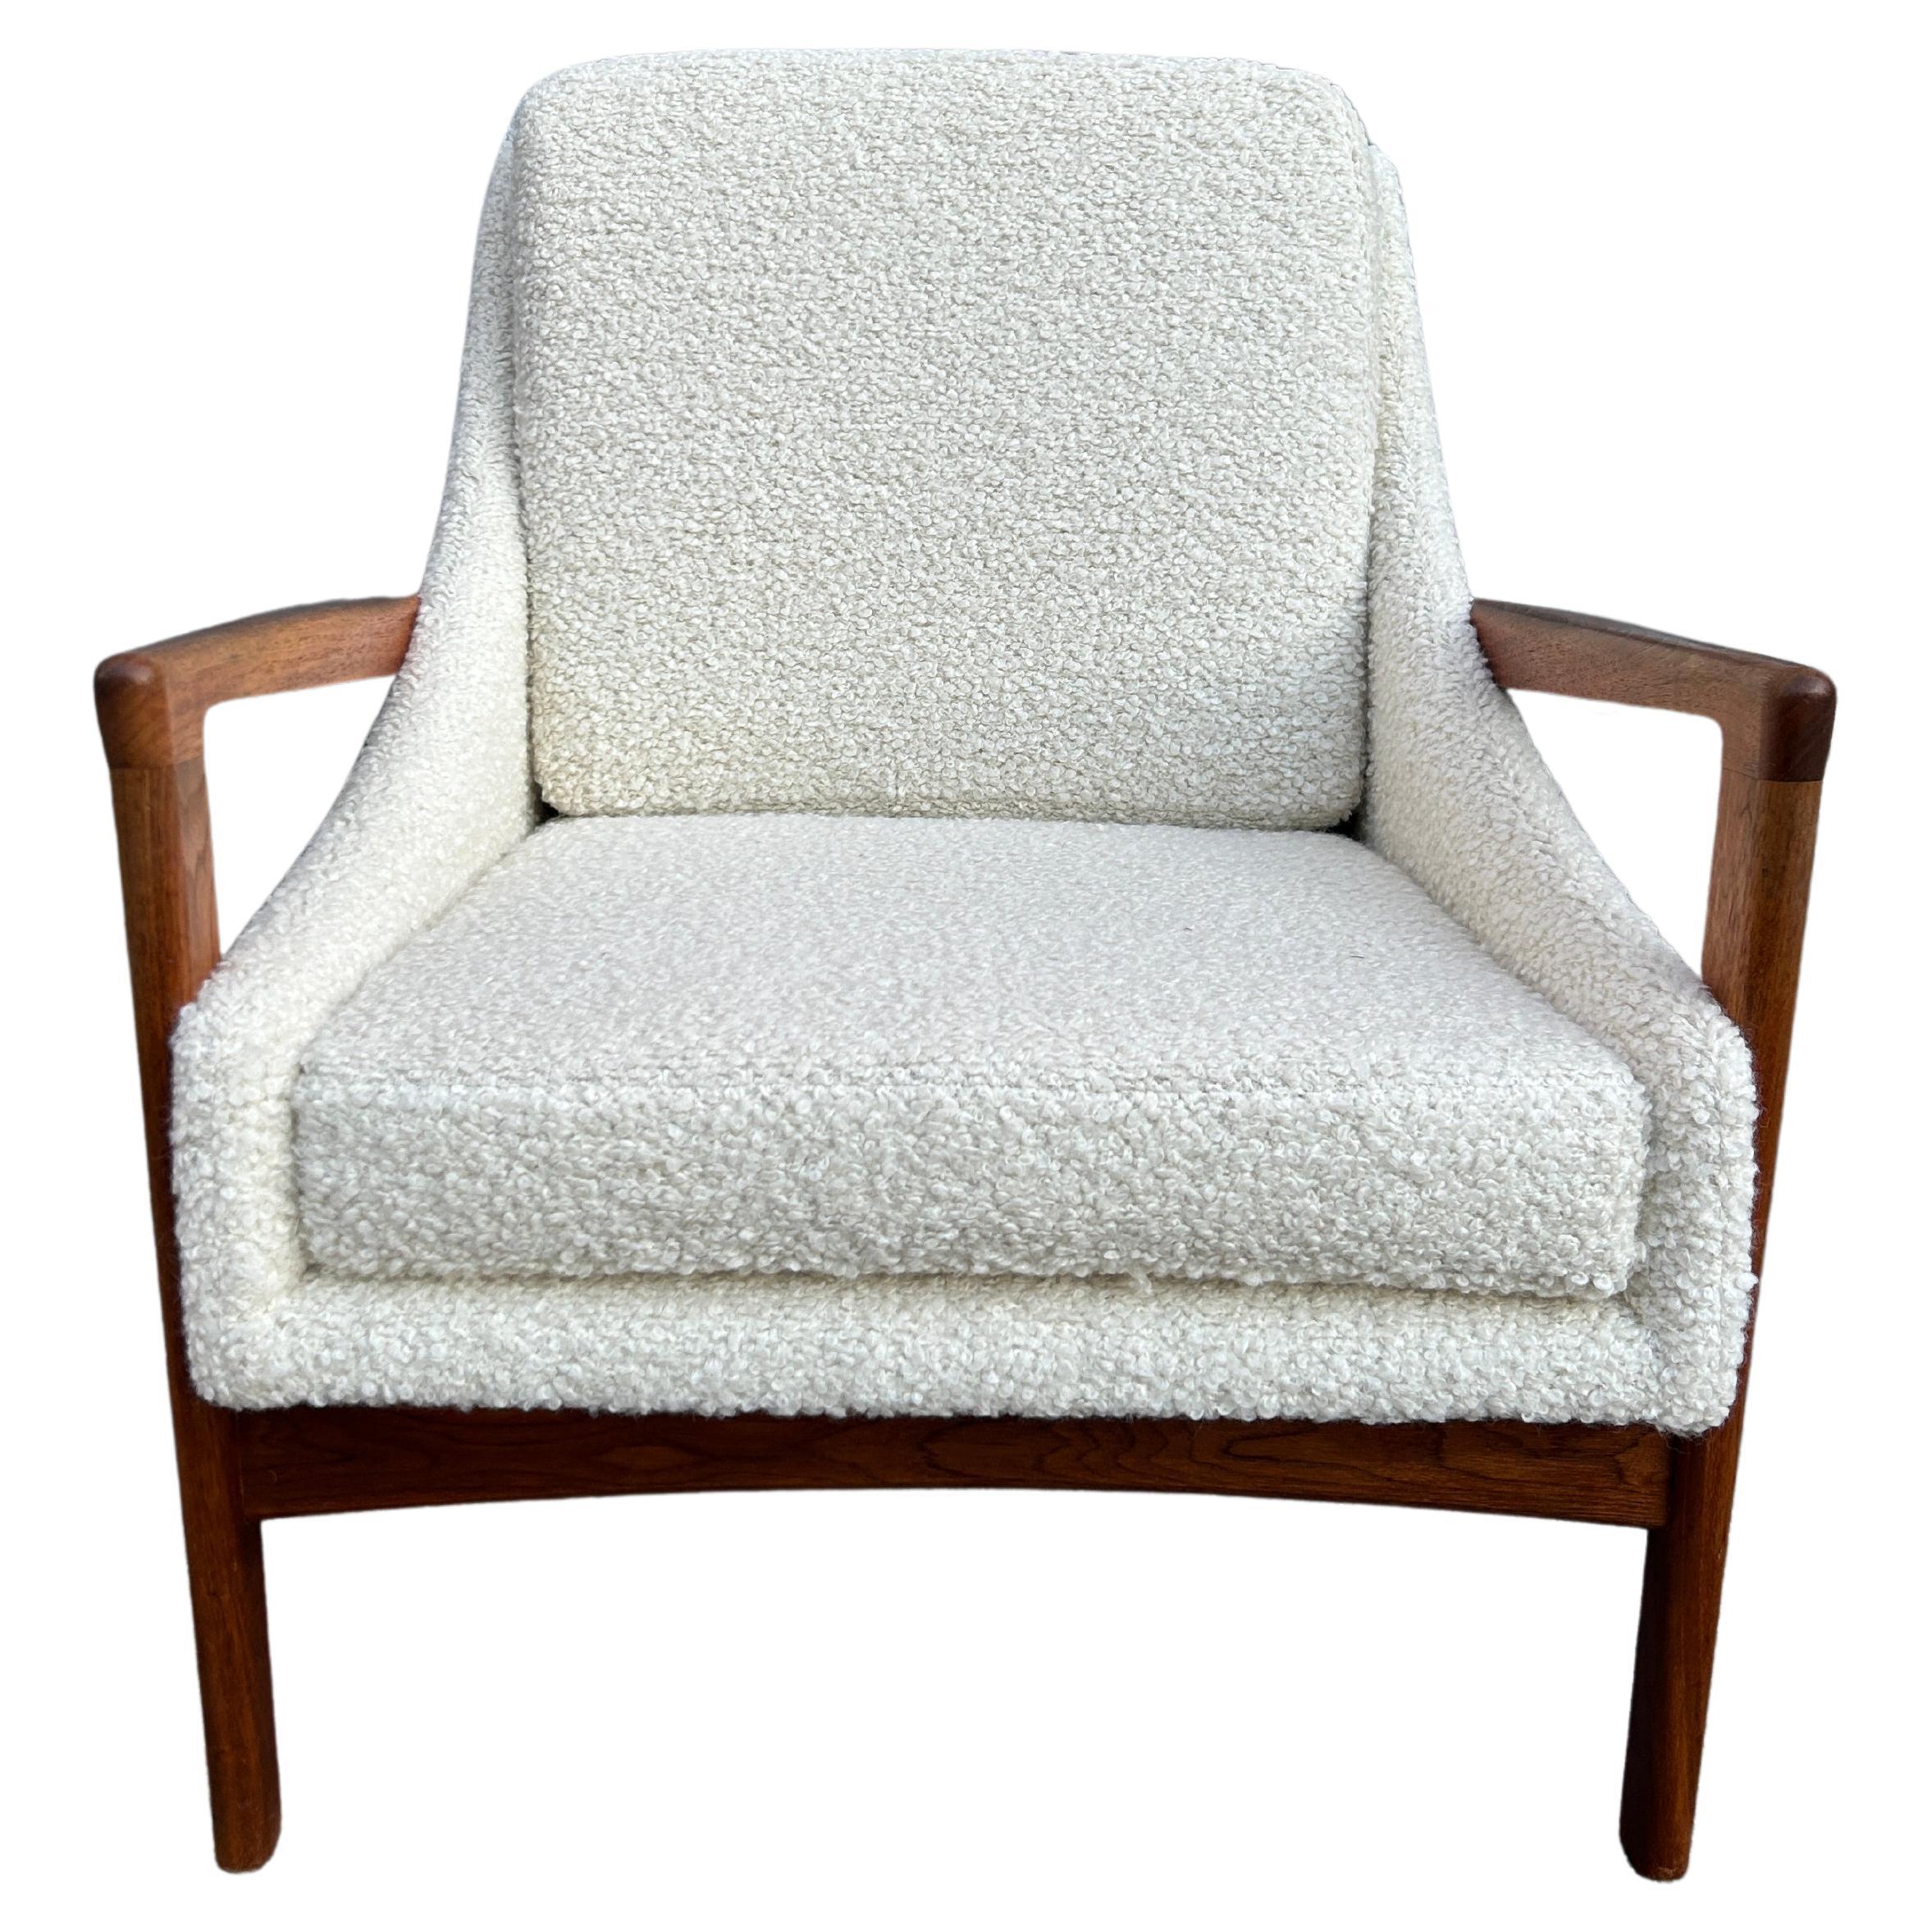 Stunning Mid Century Danish modern lounge chair in Boucle with wood frame For Sale 2